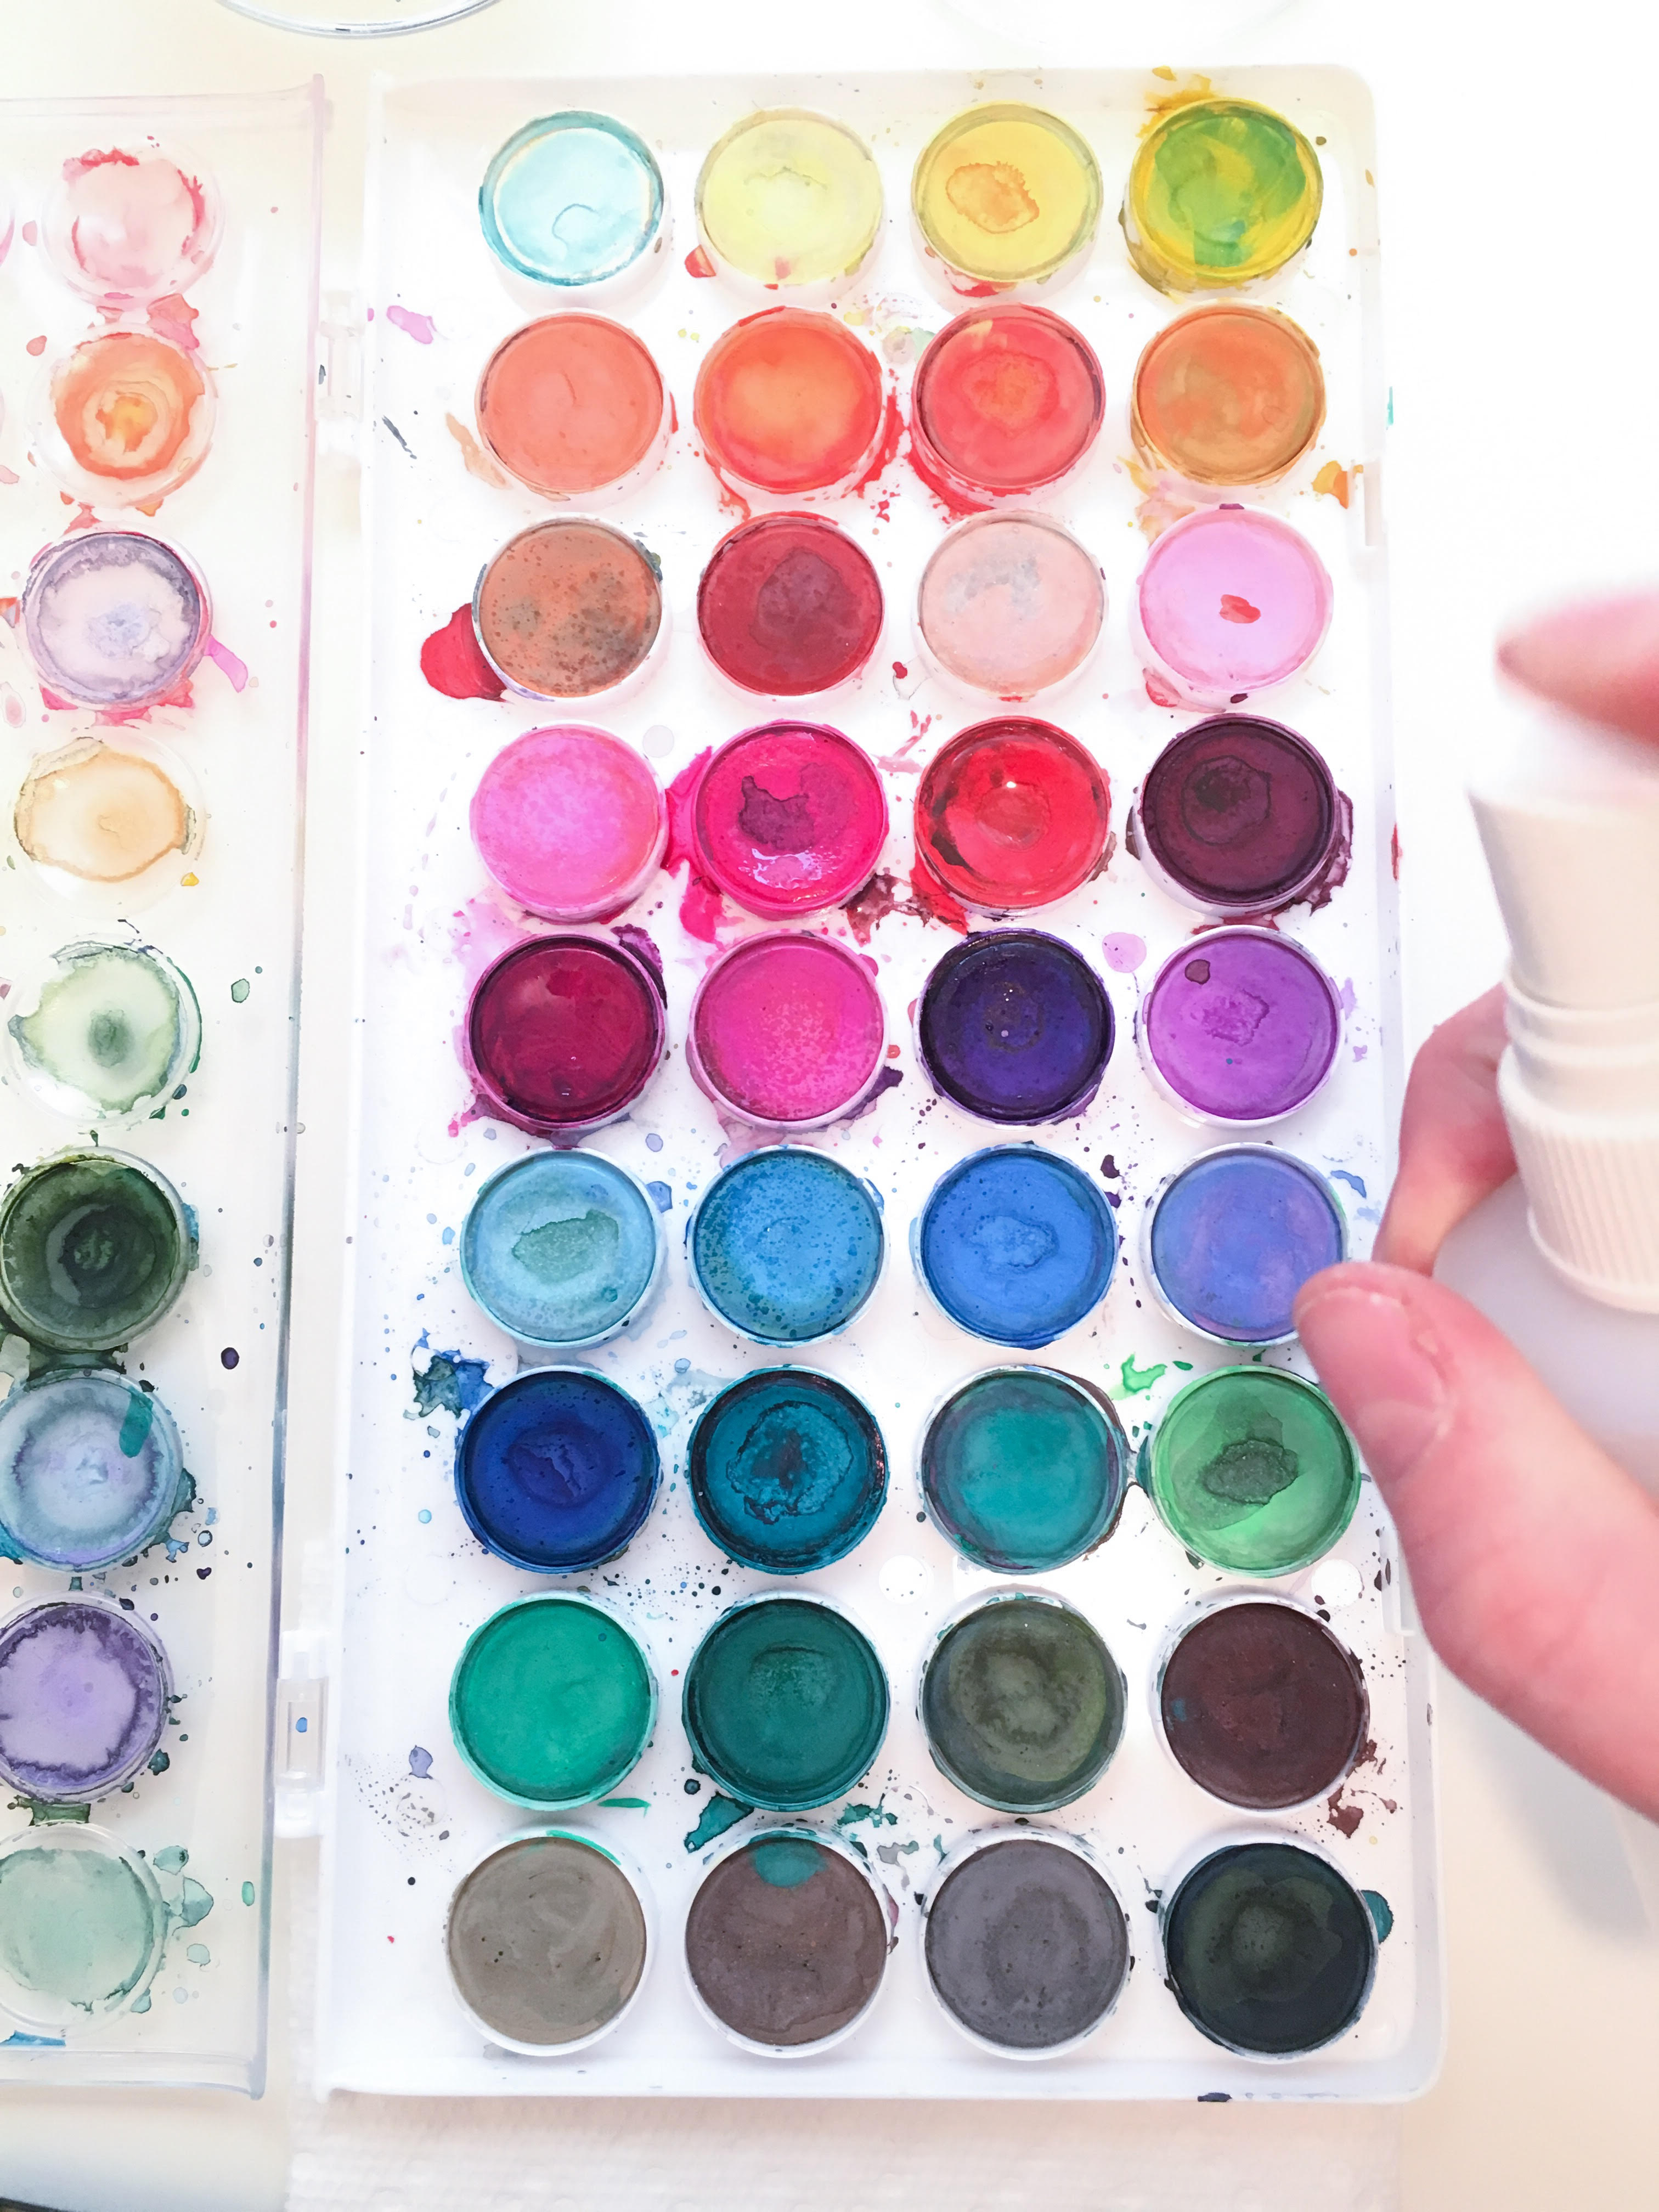 Starting a new hobby in watercolor doesn't need to be daunting. Check out our guide to watercolor for beginners from Natalie Malan on the CreativeLive blog.